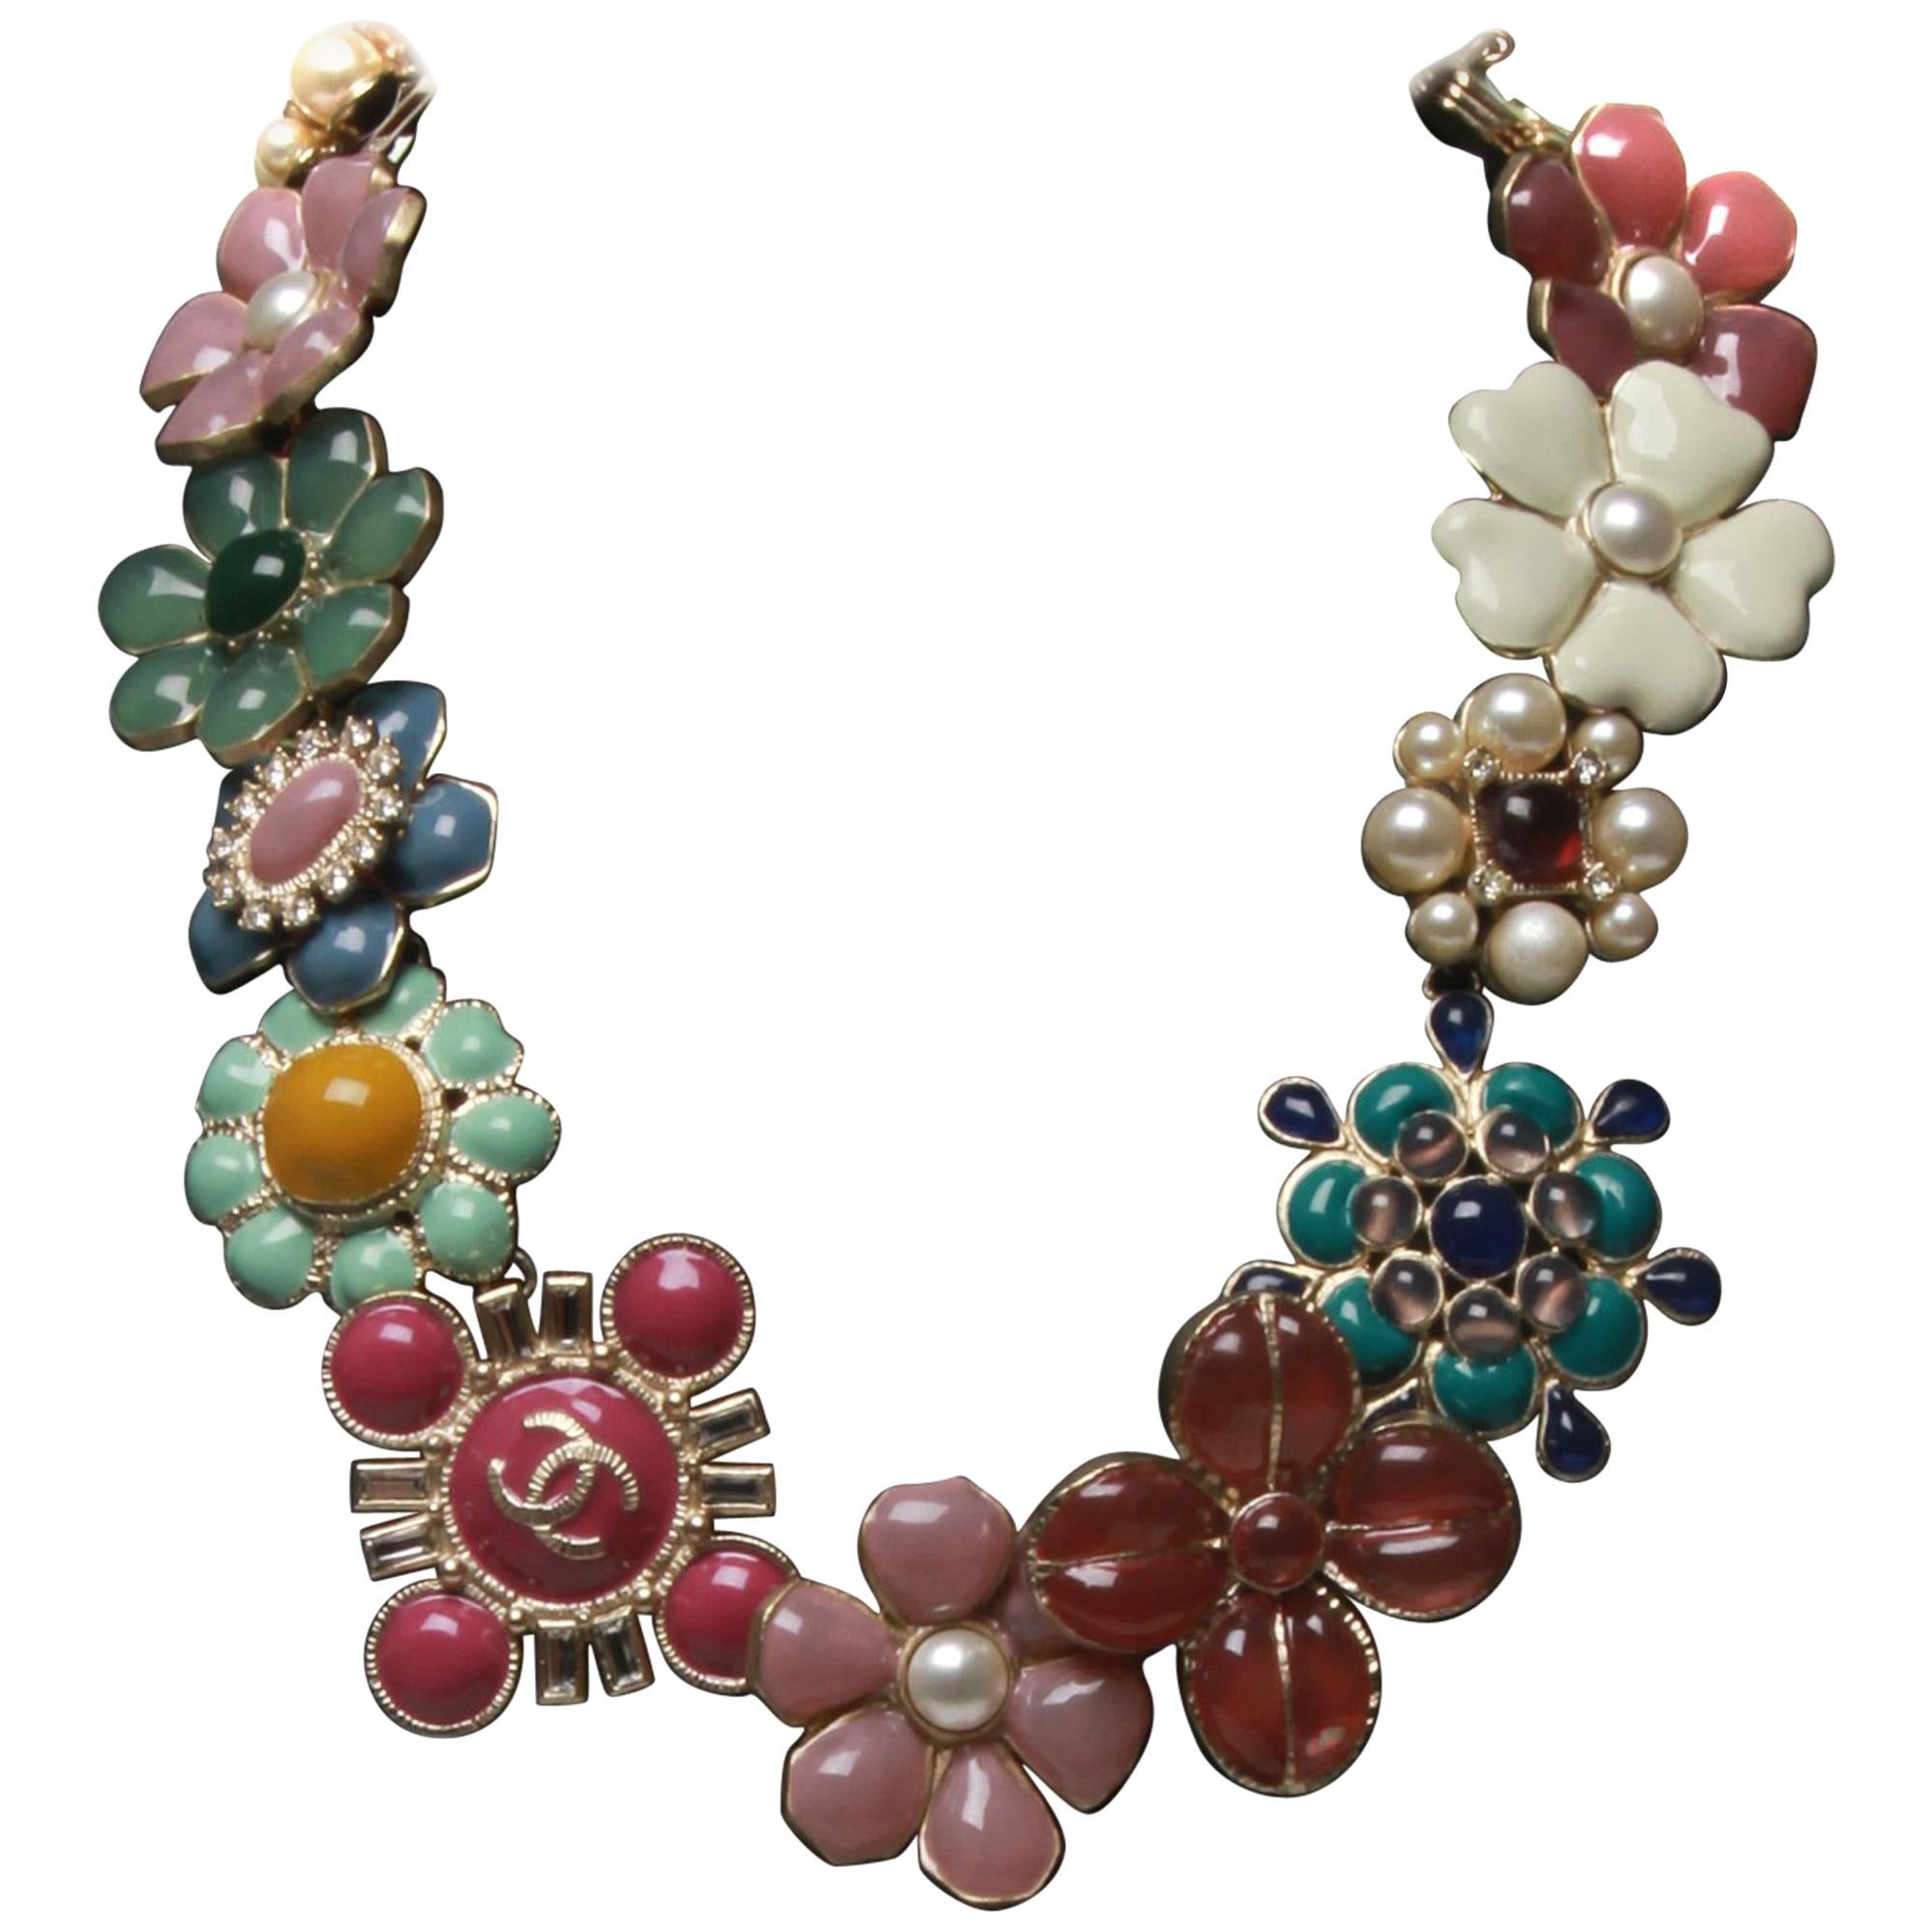 Chanel Glass and Enamel Floral Necklace 